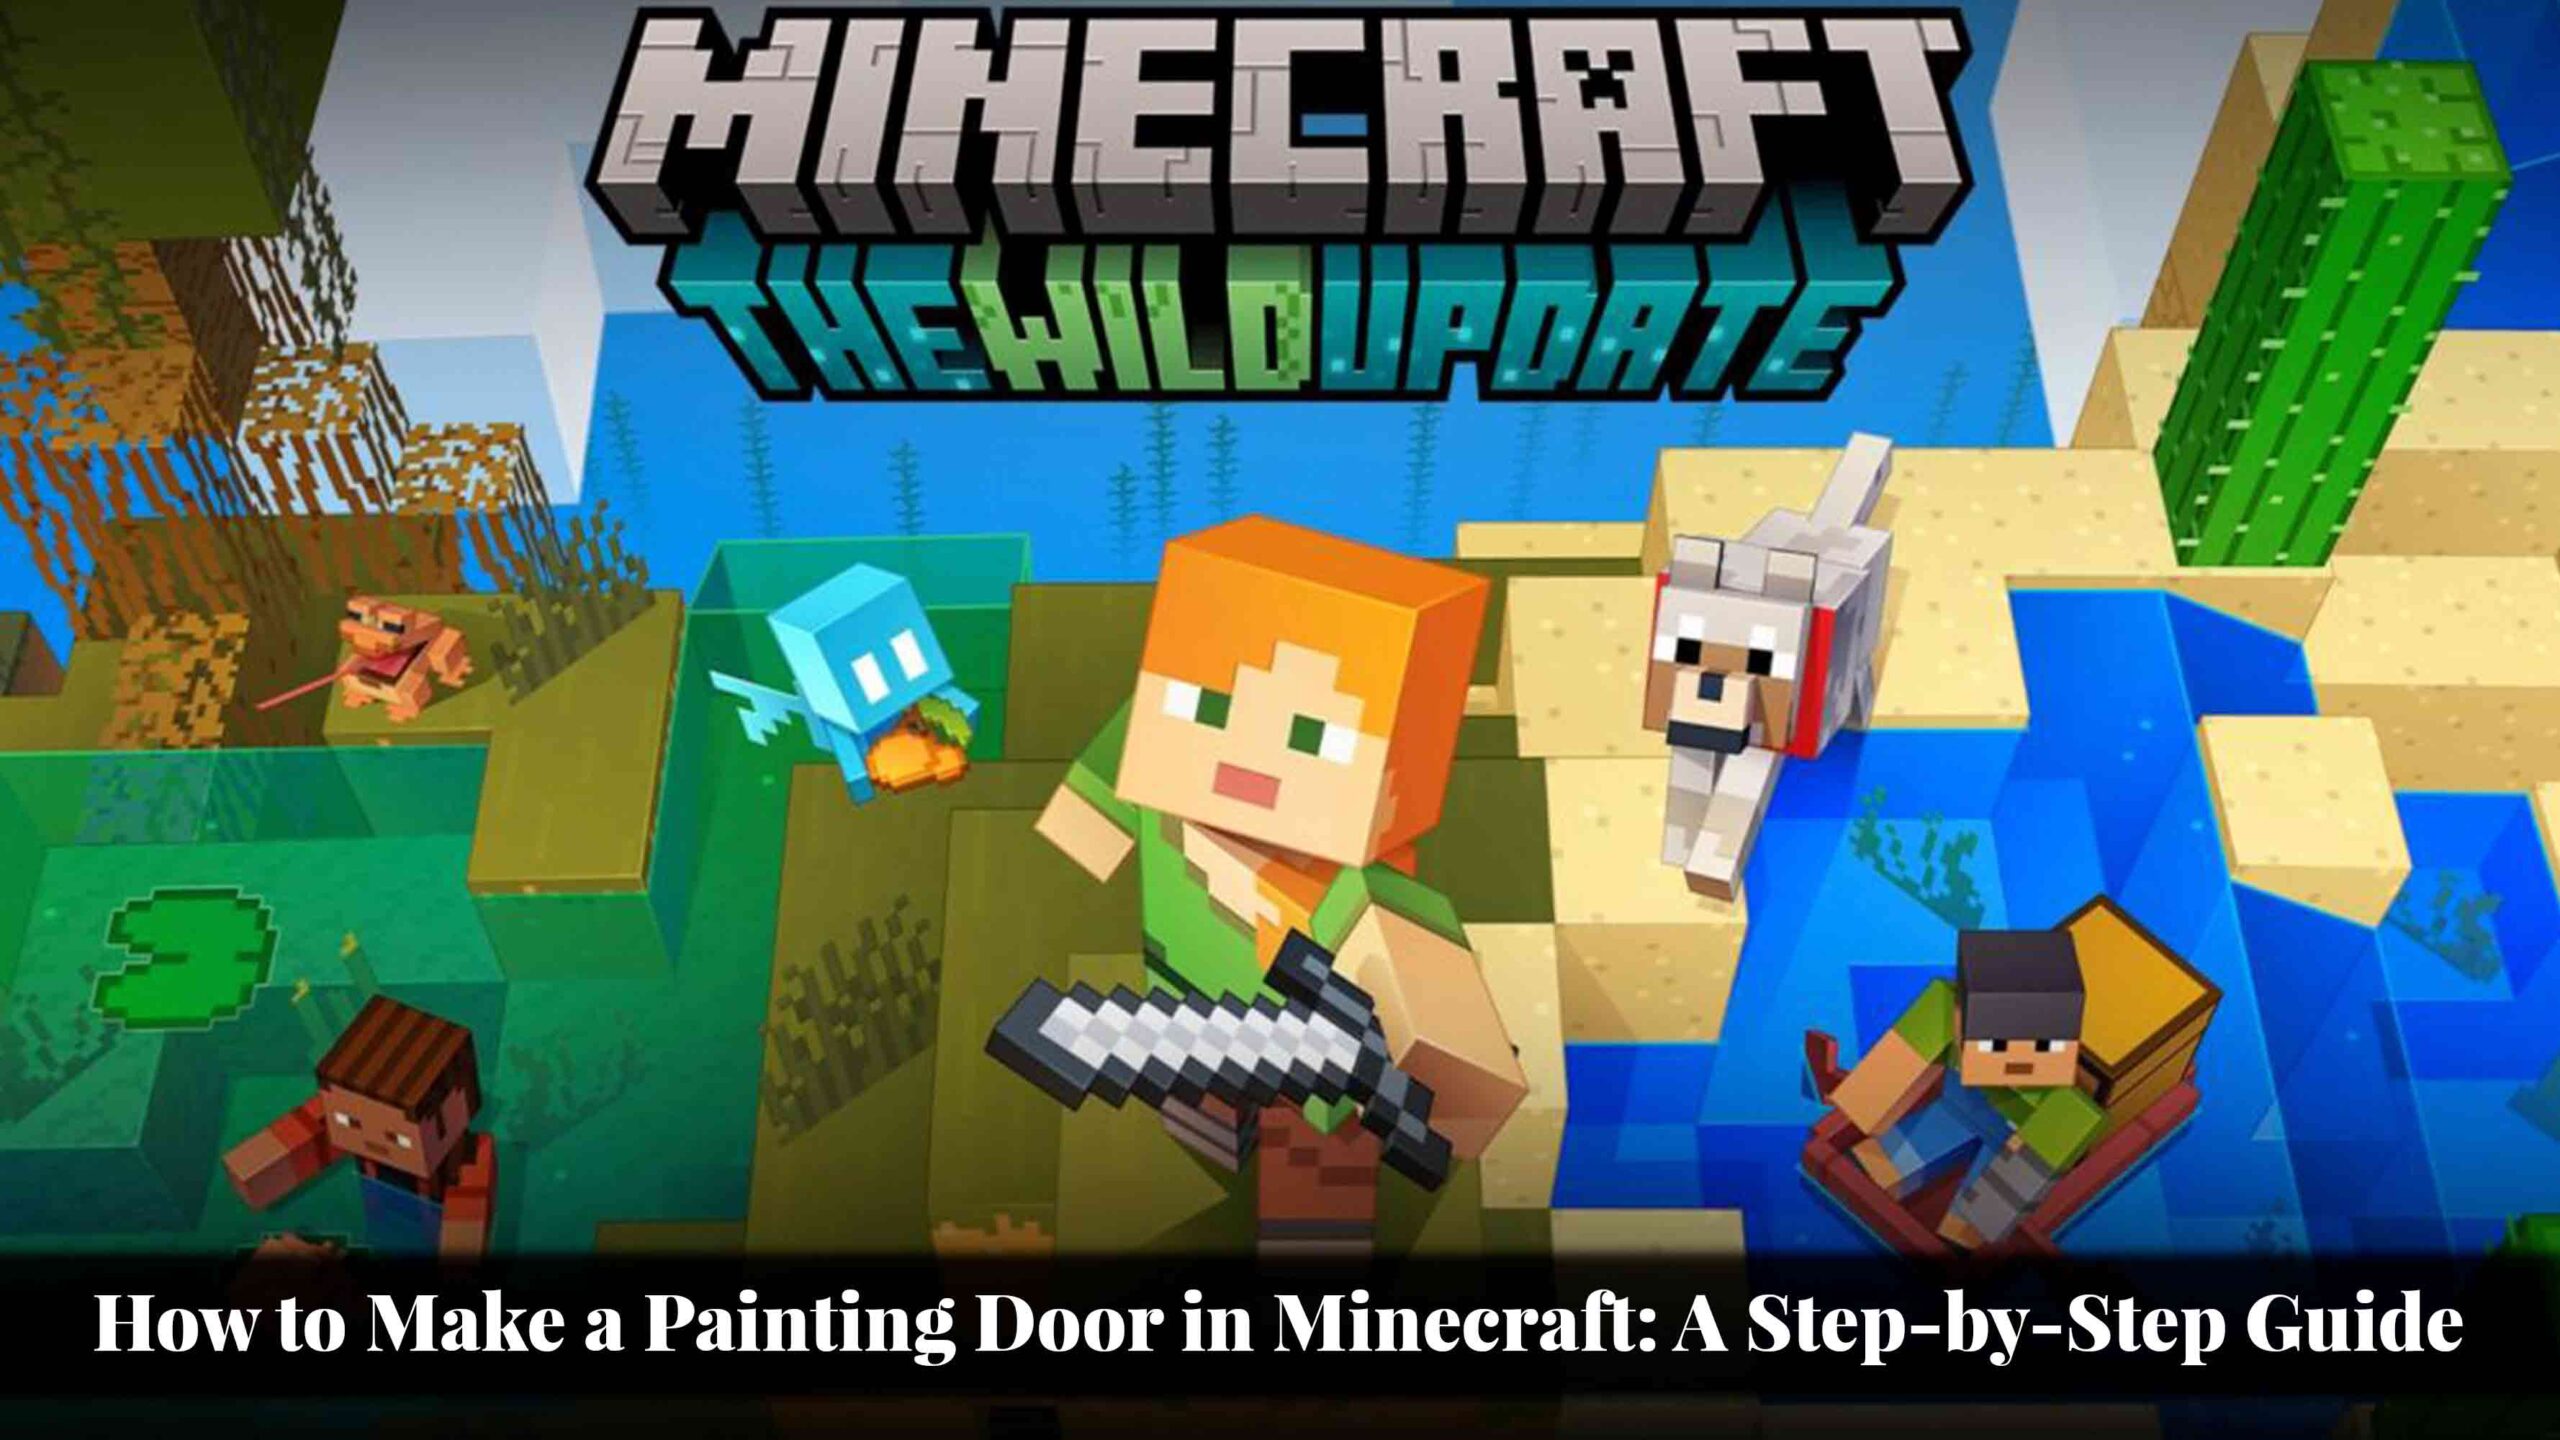 How to Make a Painting Door in Minecraft